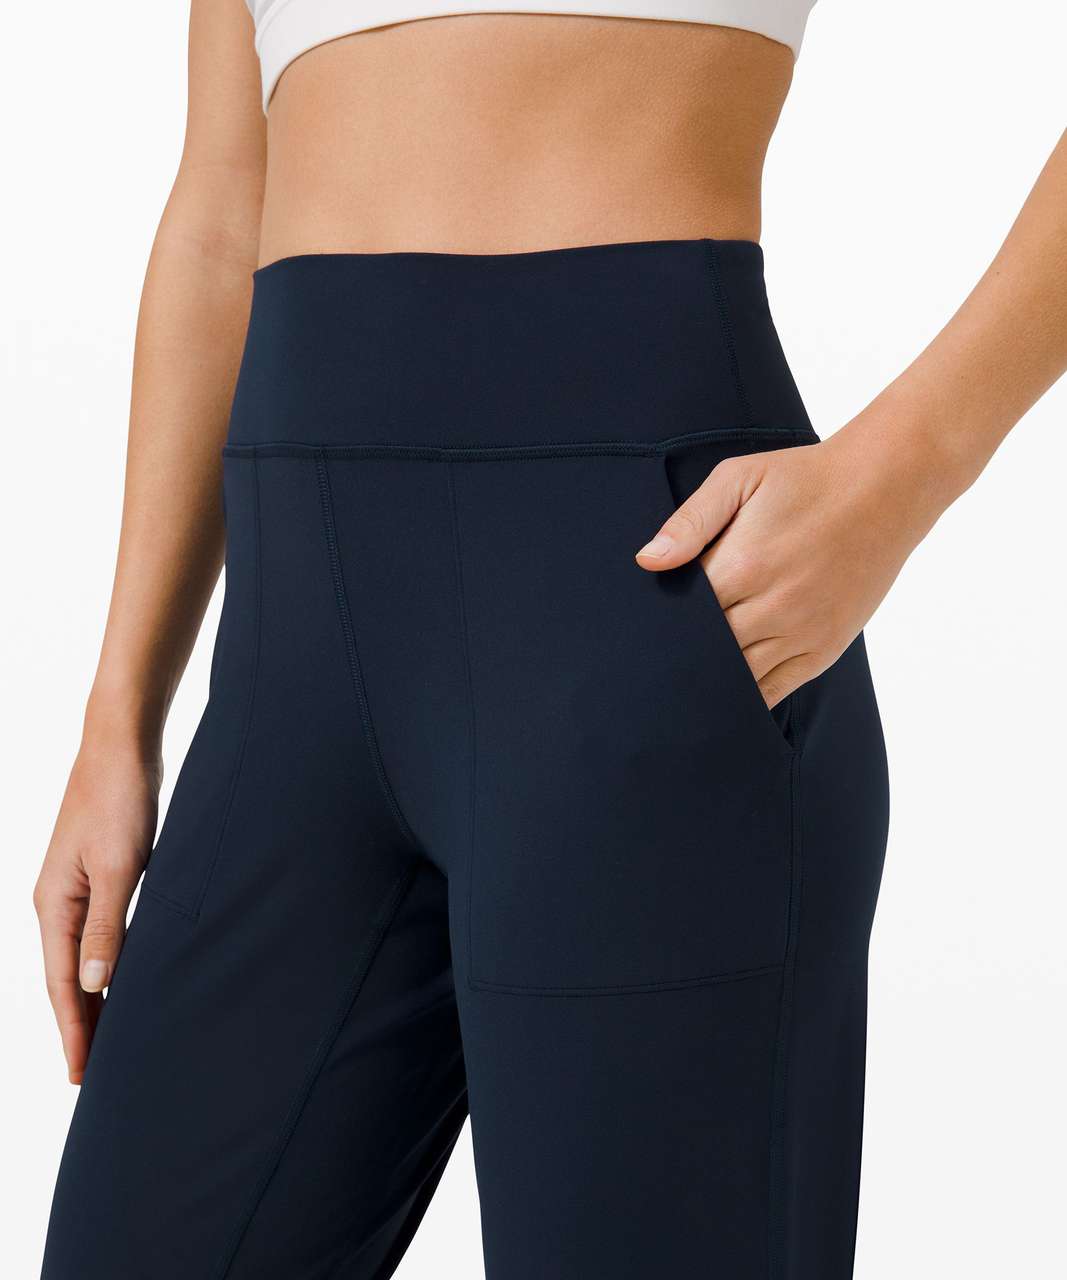 Today's yoga flow fit💙 Align Jogger in True Navy (8) and Swiftly Tech  Racerback 2.0 *Race Length in Serene Blue (6) : r/lululemon